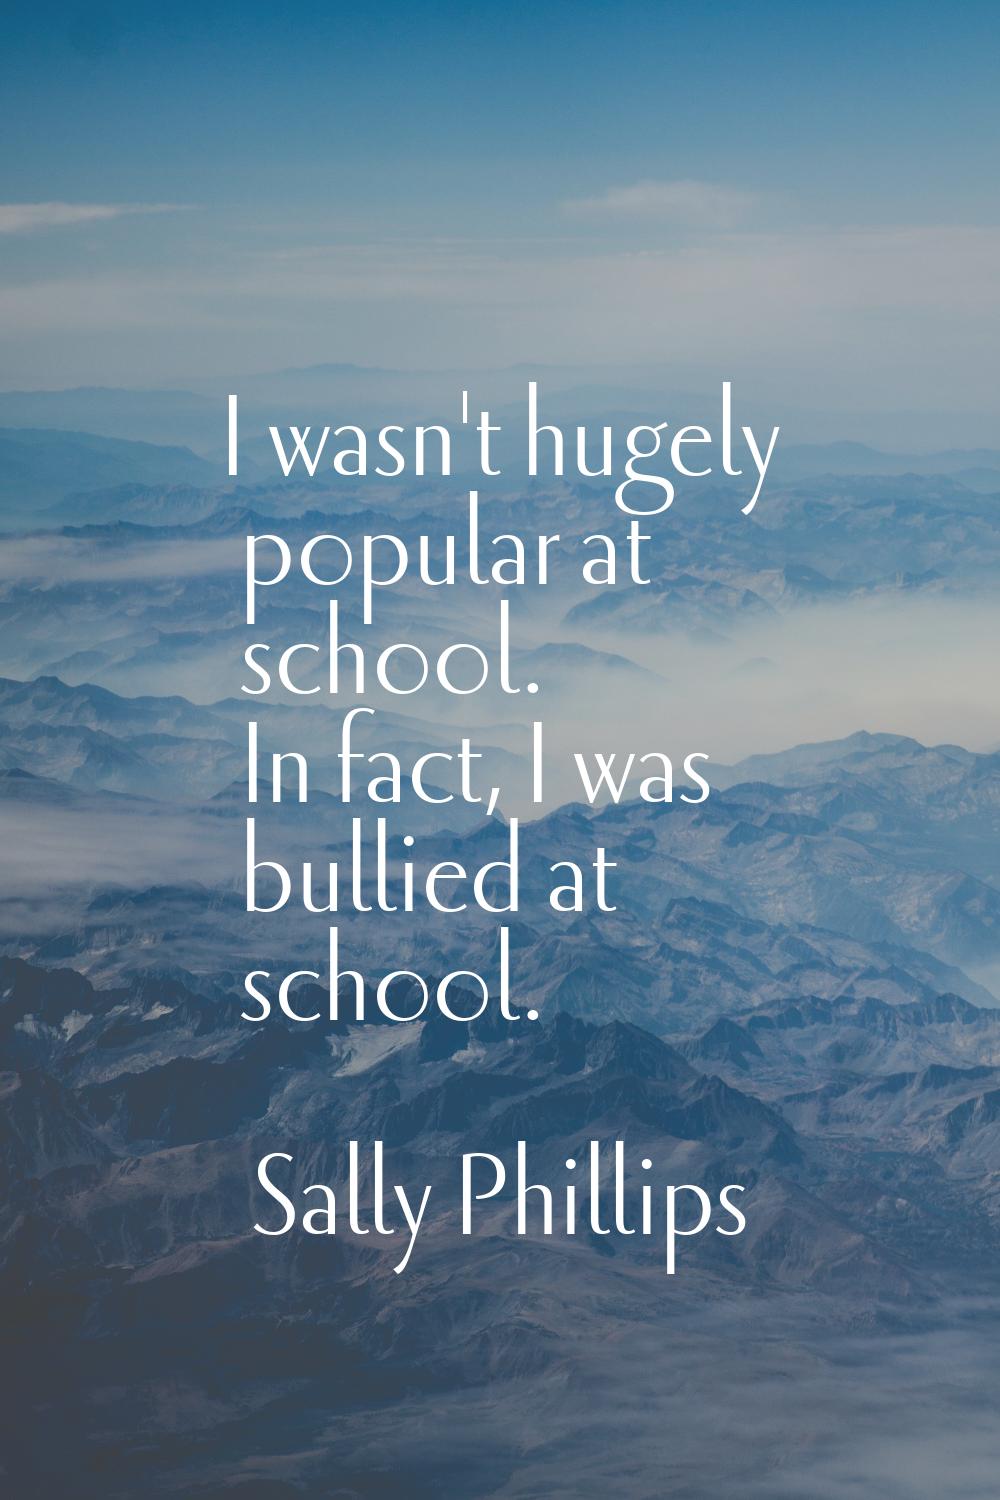 I wasn't hugely popular at school. In fact, I was bullied at school.